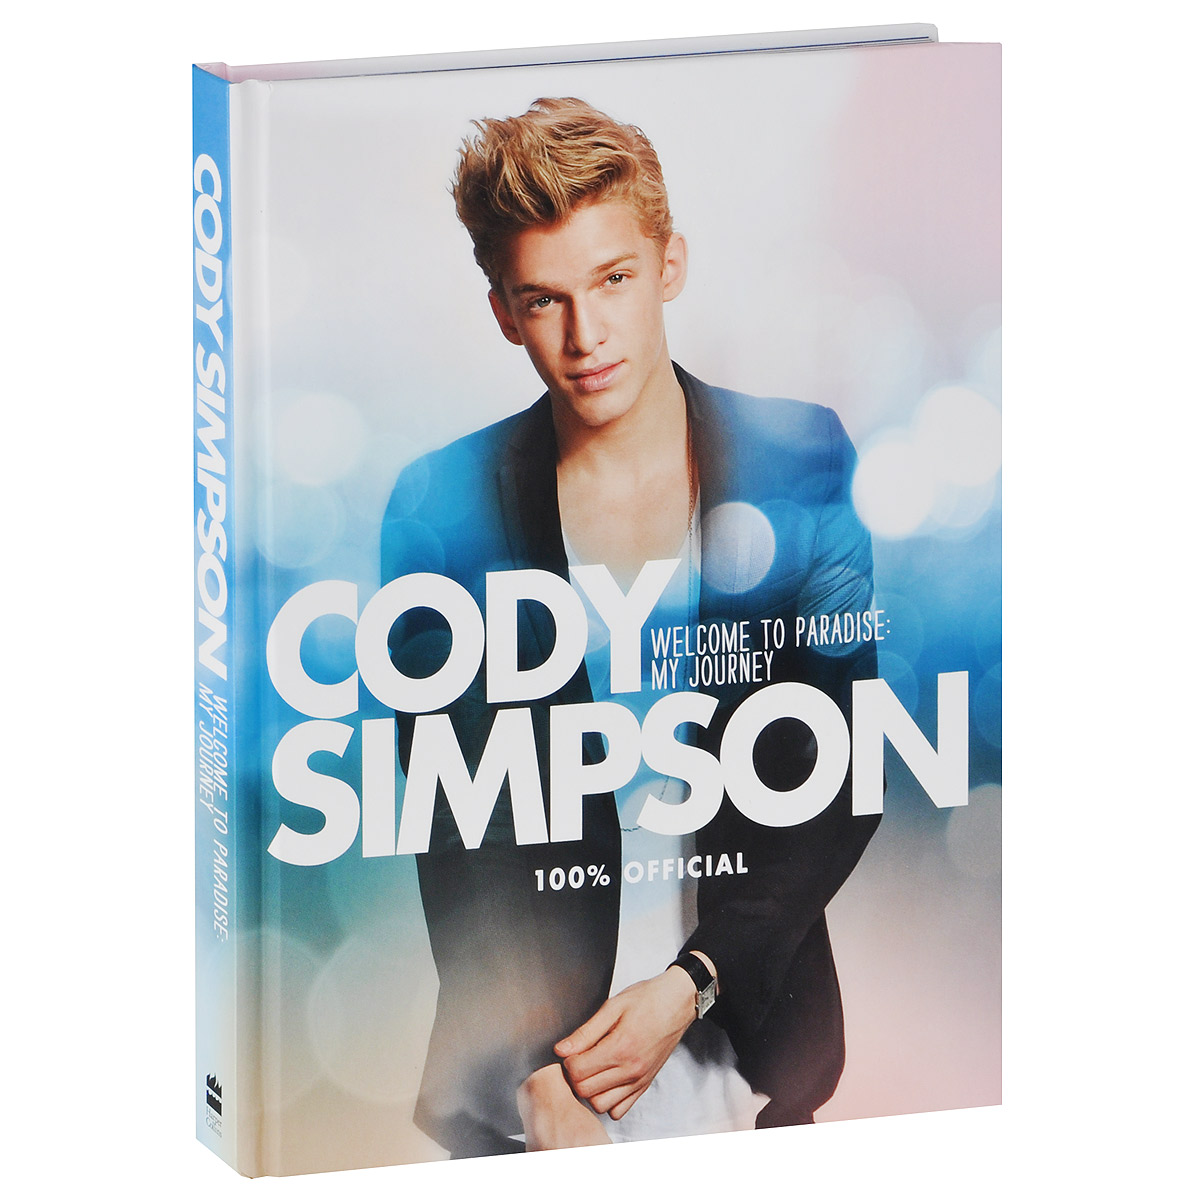 Cody Simpson: Welcome to Paradise: My Journey